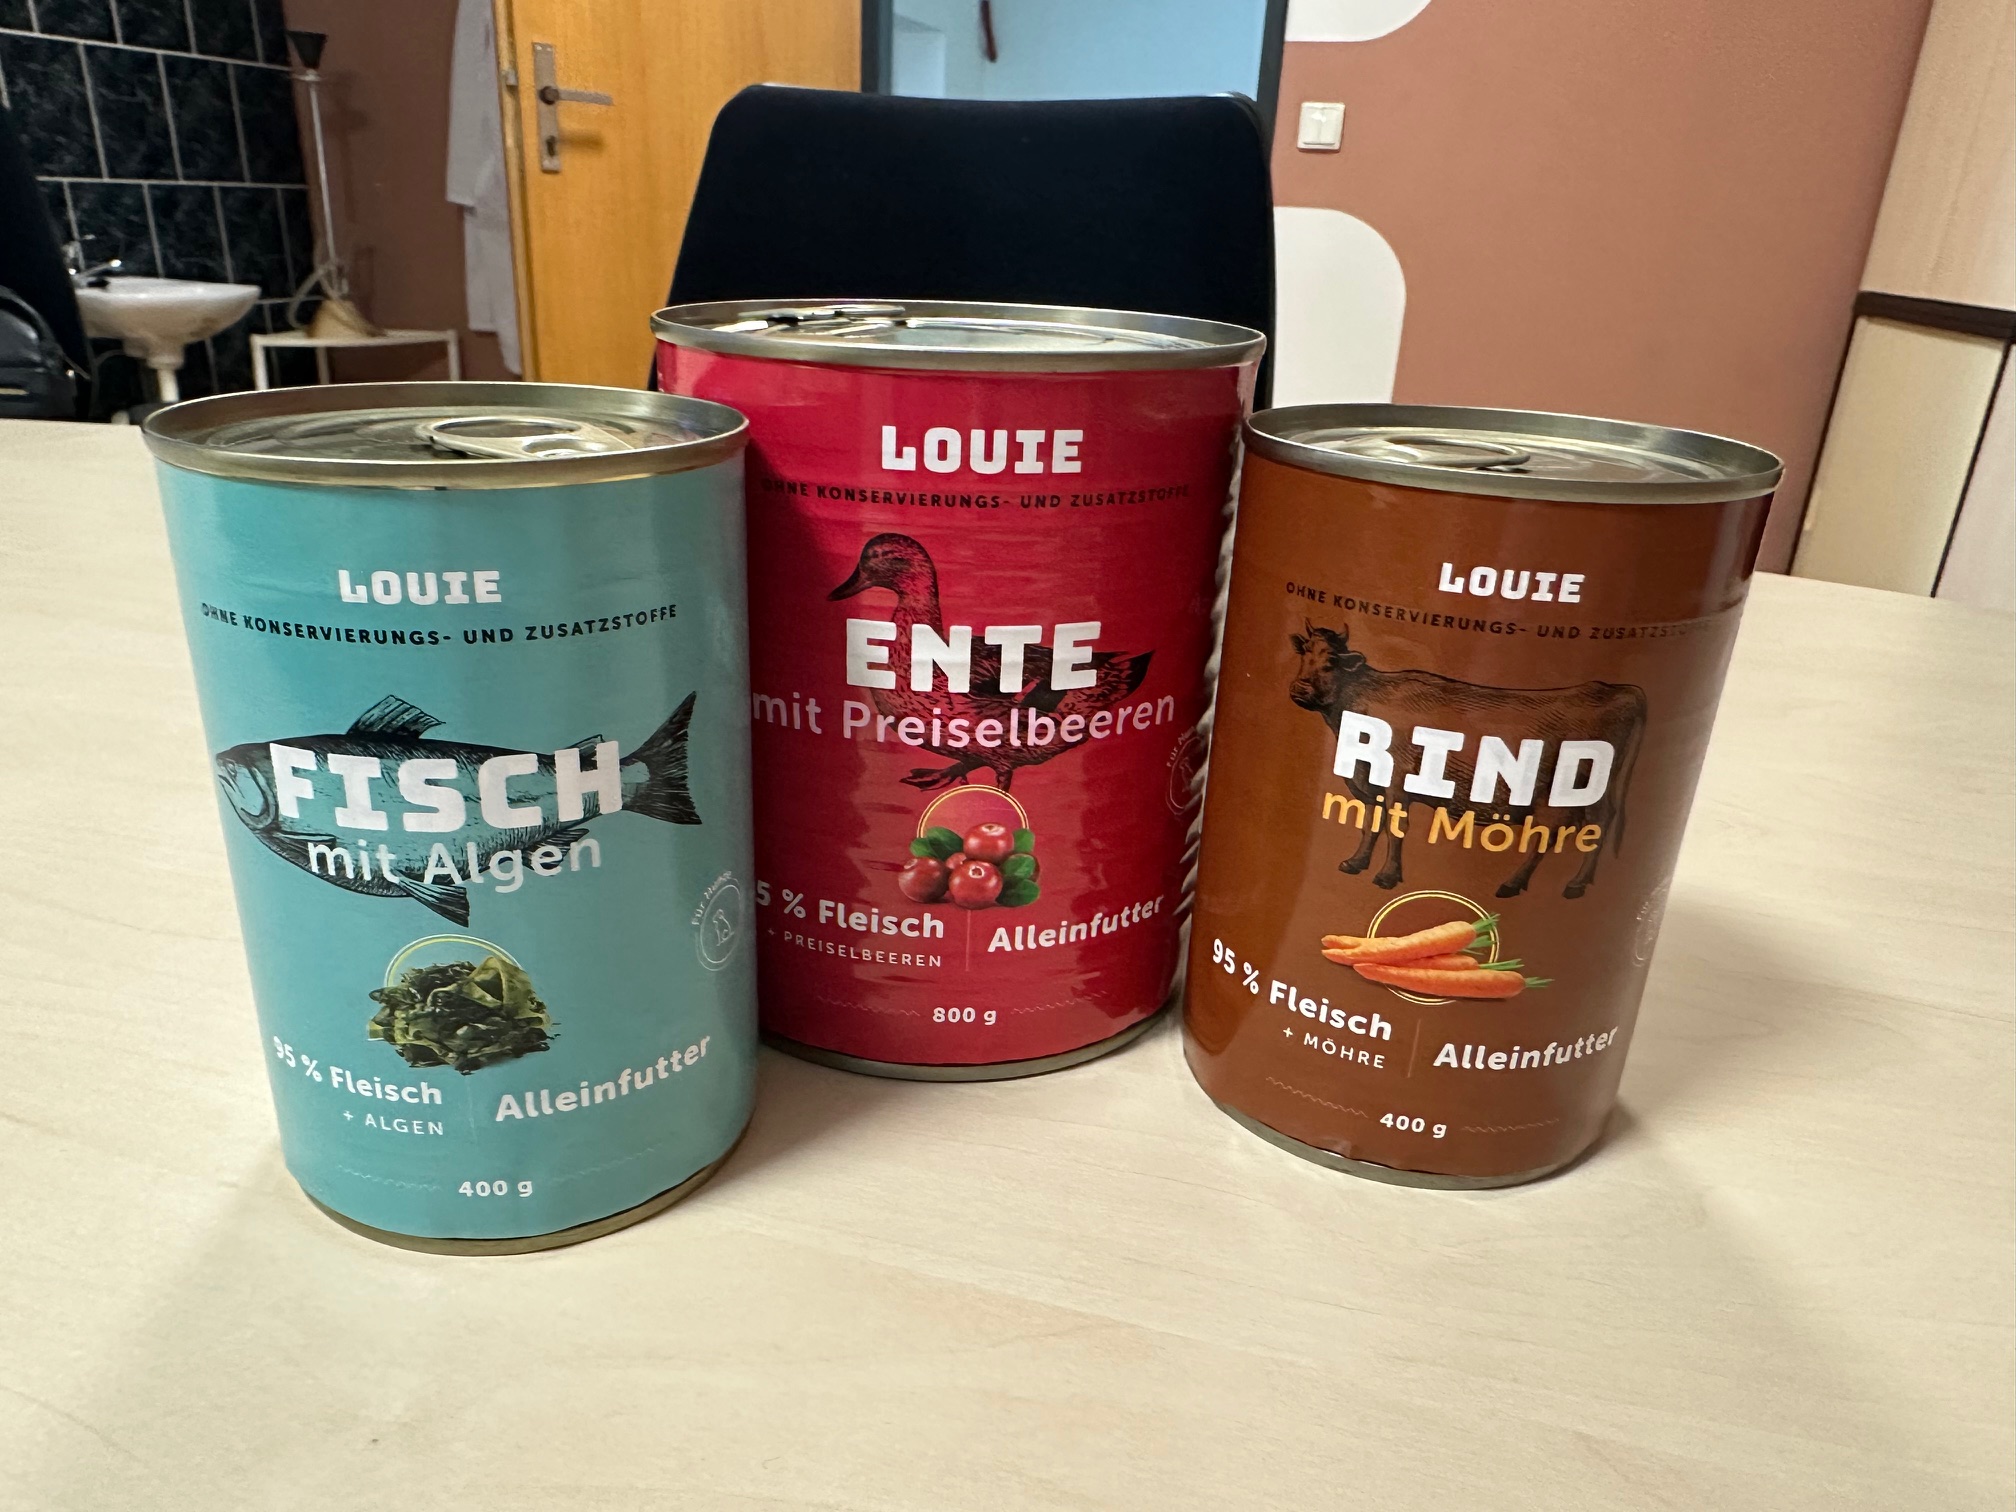 New LOUIE products with vegetables made!